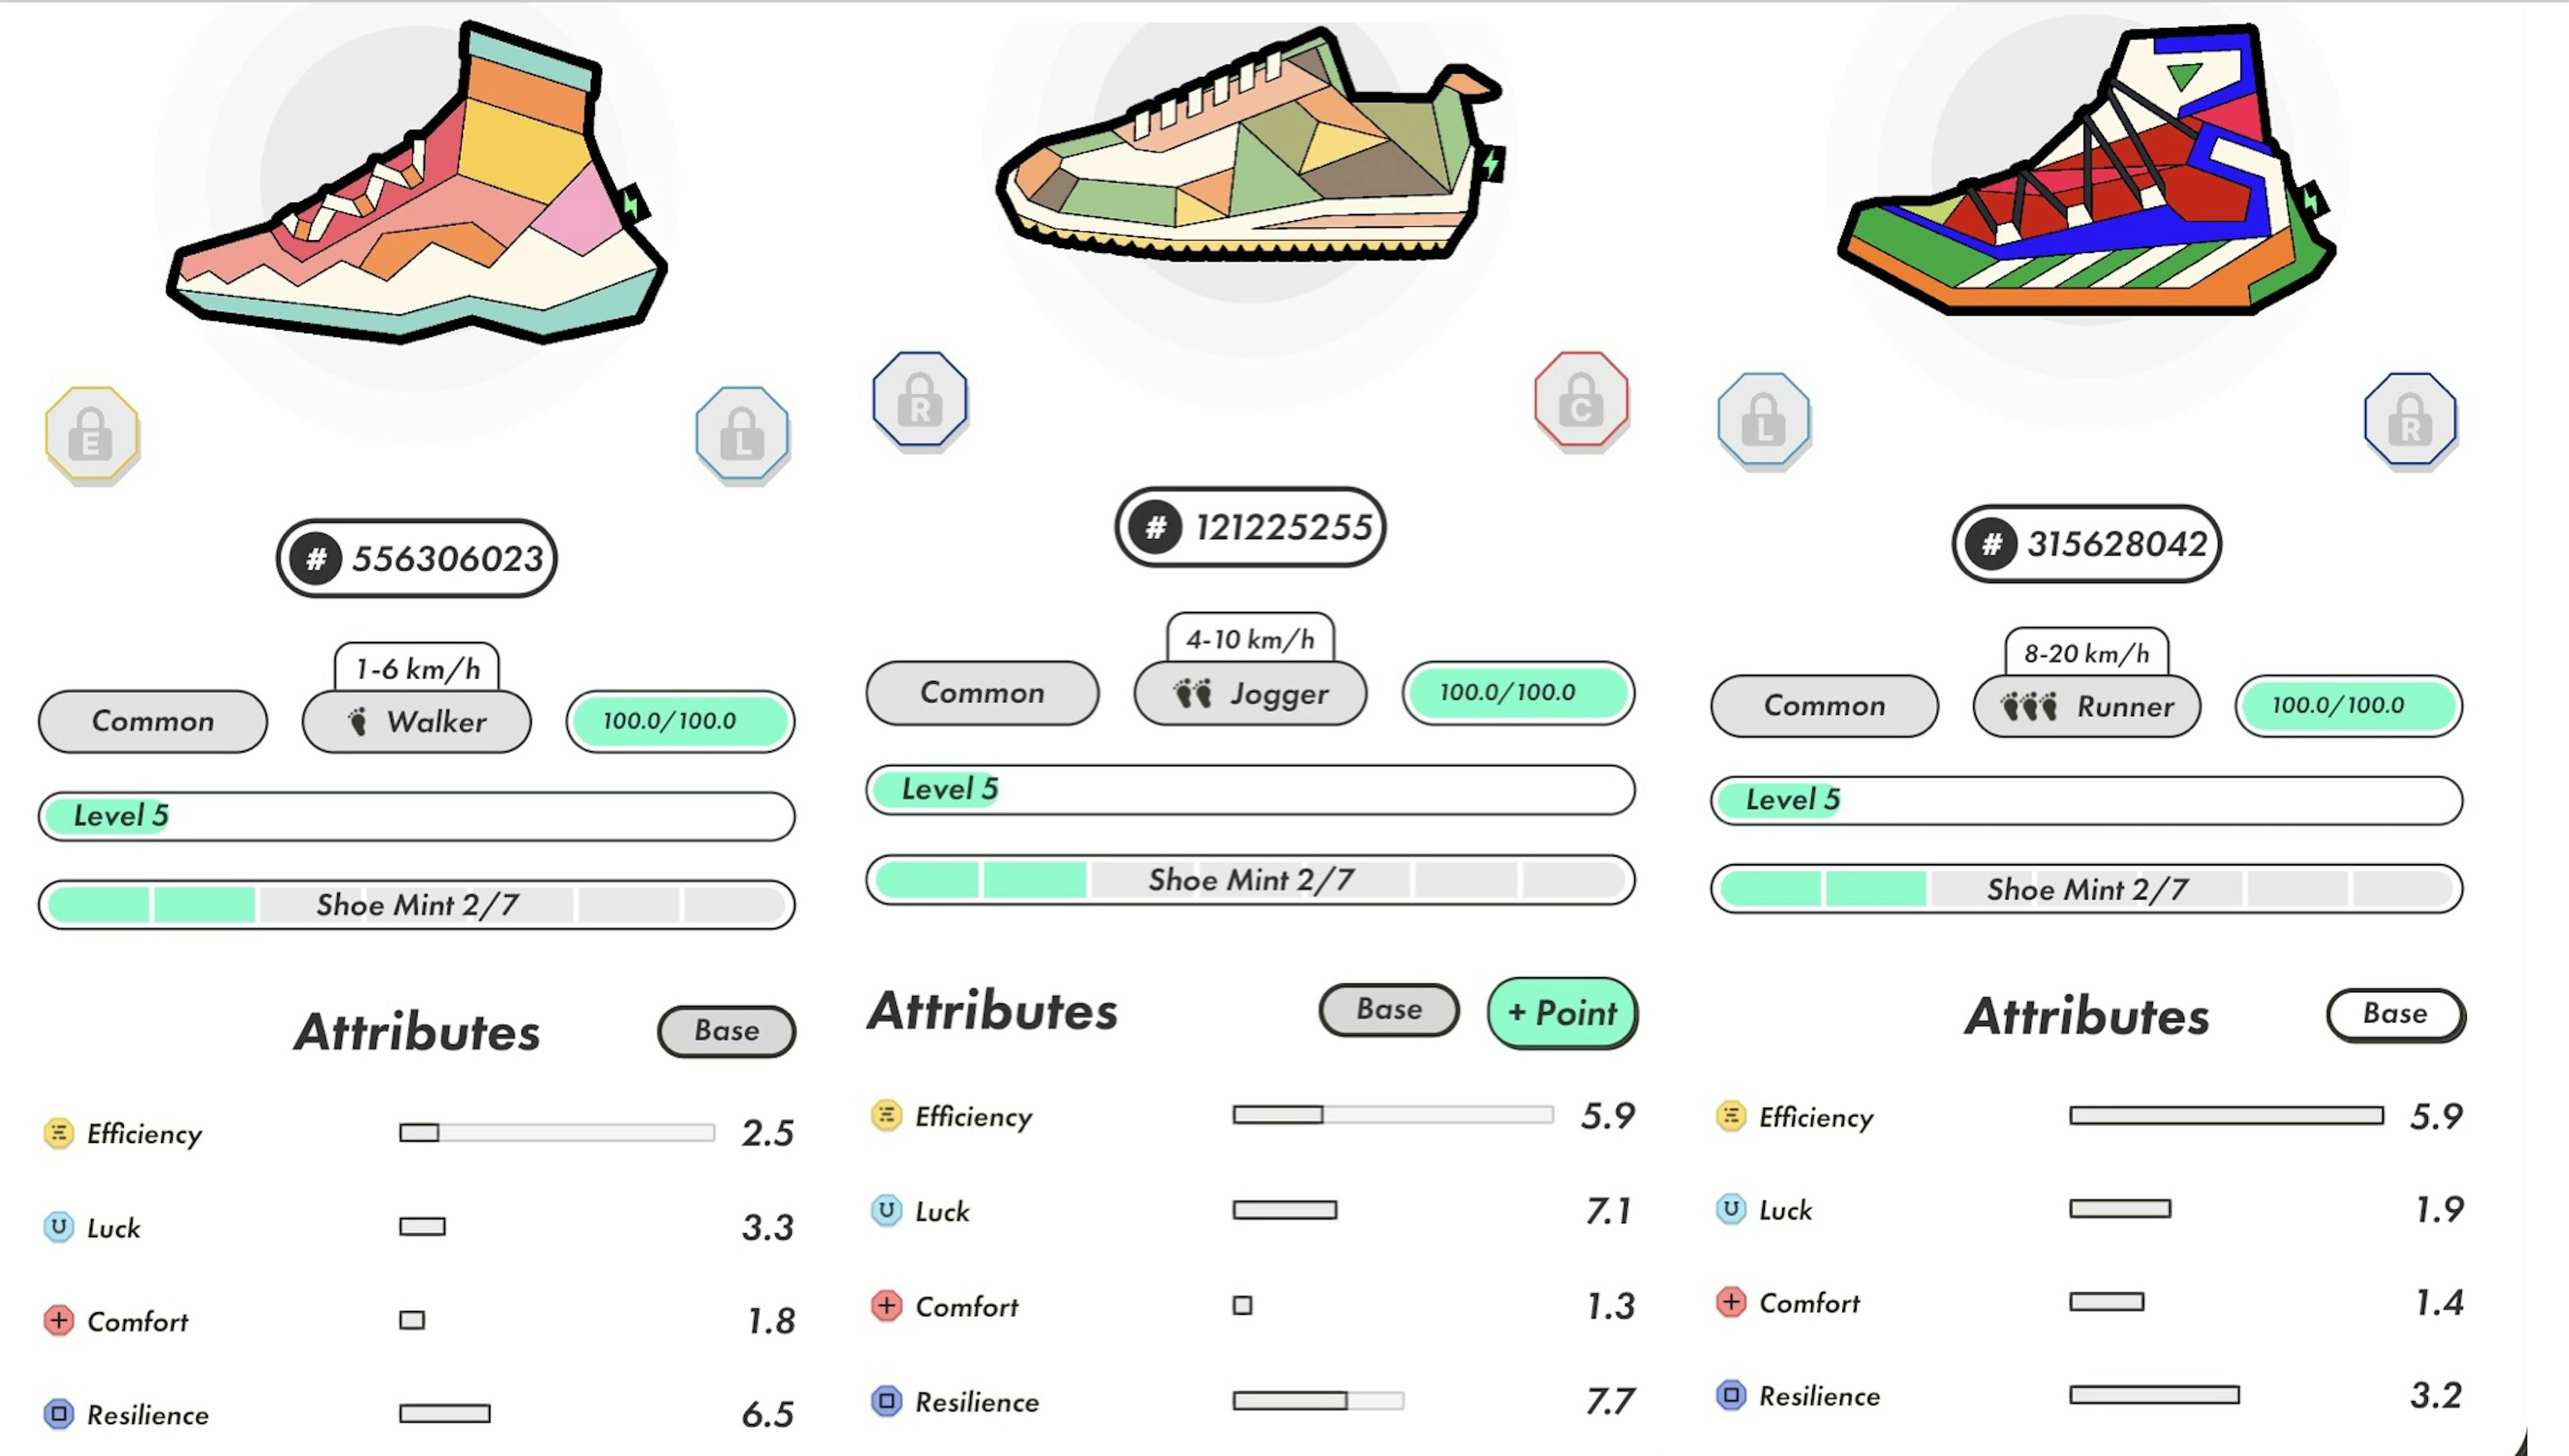 Average prices for sneakers with good base characteristics in April: Walker around $1300, Jogger $1350, Runner $1300. Screenshot from StepN in-app marketplace